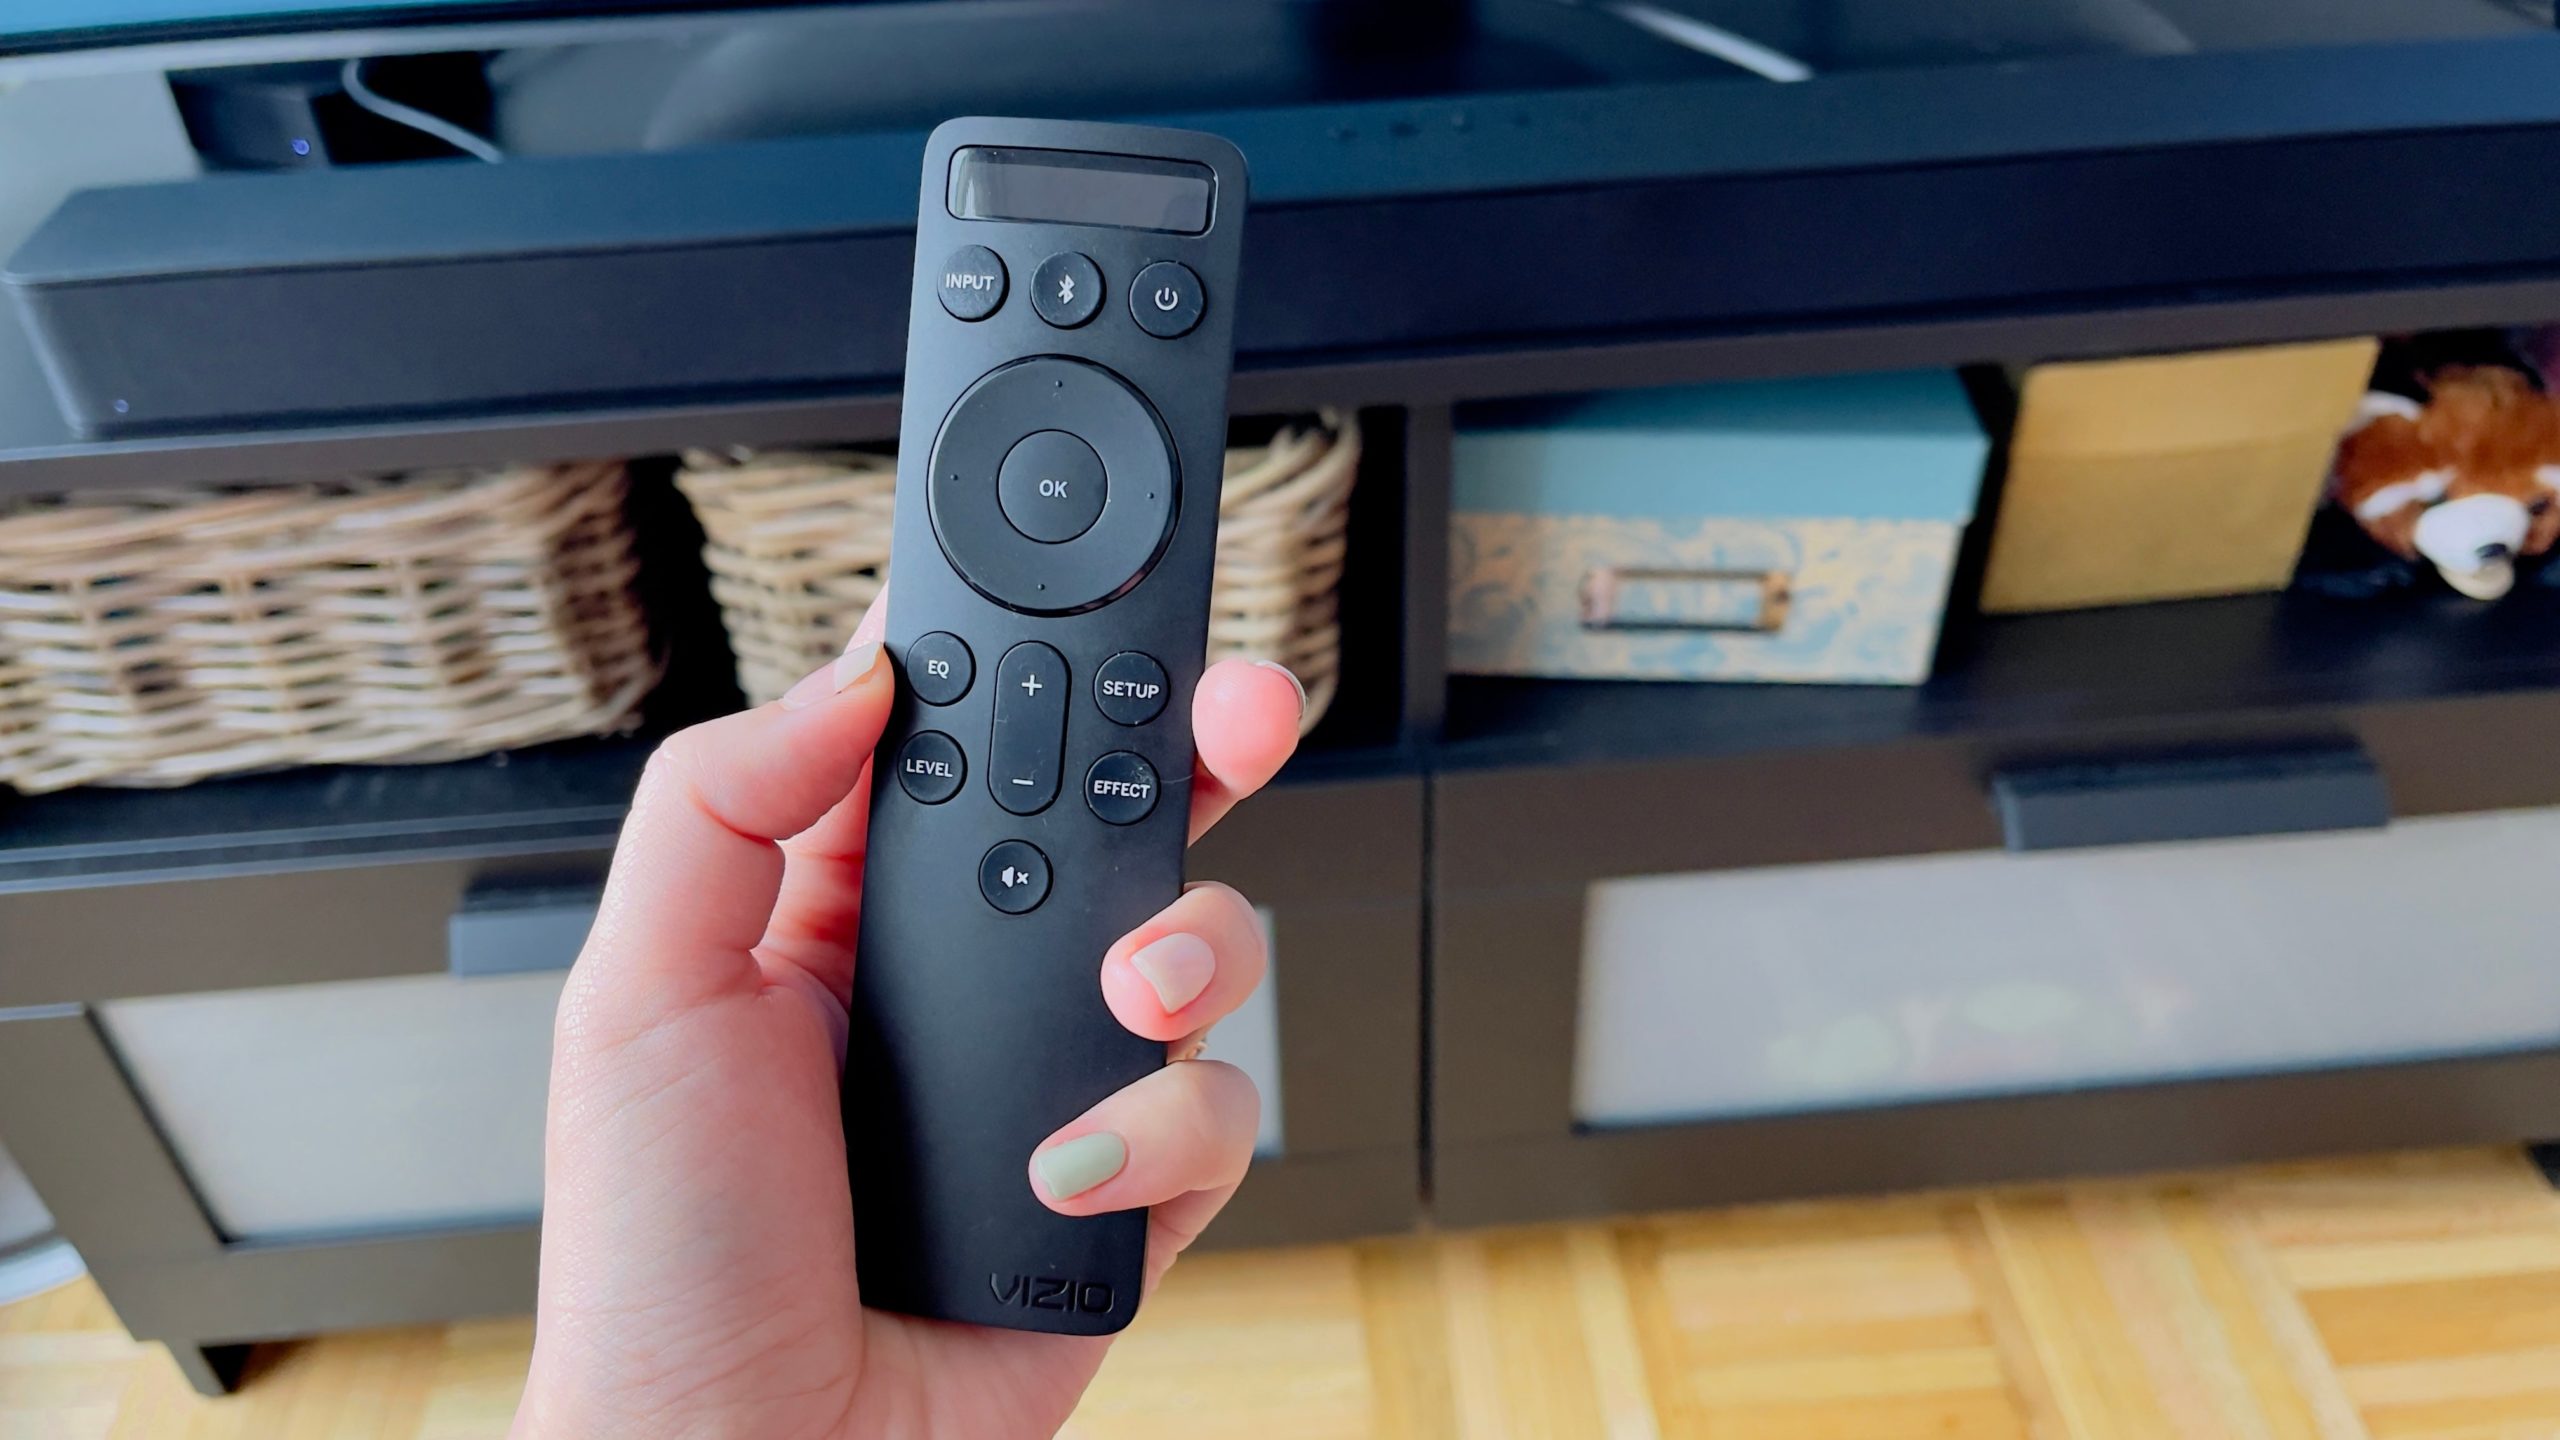 The Vizio remote isn't anything special, but makes controlling presets easy. (Photo: Victoria Song/Gizmodo)